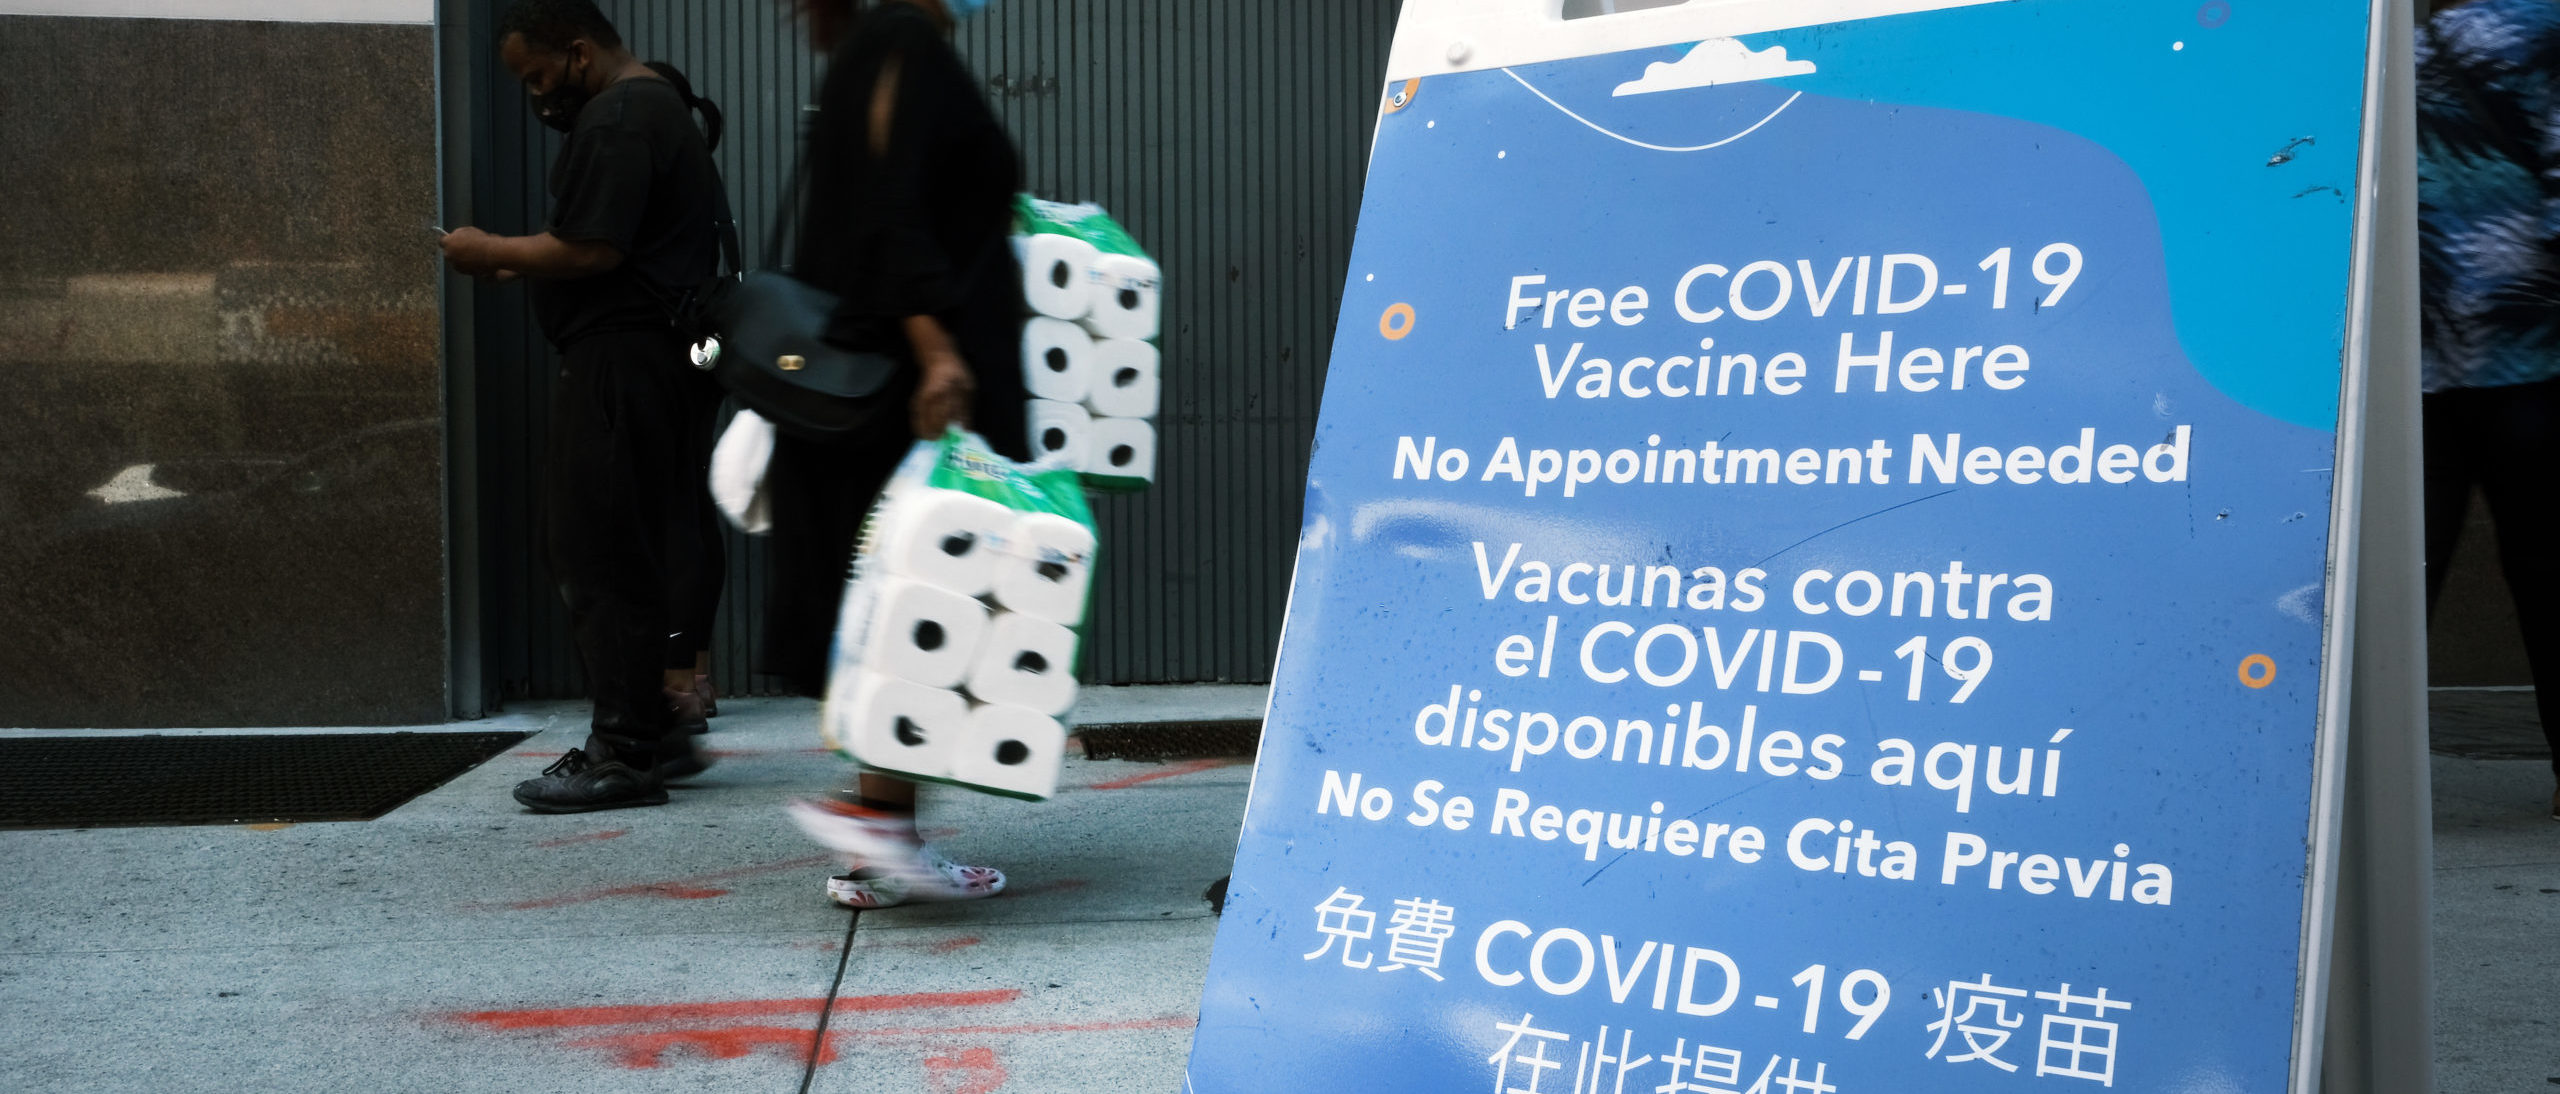 A city-operated mobile pharmacy advertises the COVID-19 vaccine in a Brooklyn neighborhood on July 30, 2021 in New York City. (Photo by Spencer Platt/Getty Images)